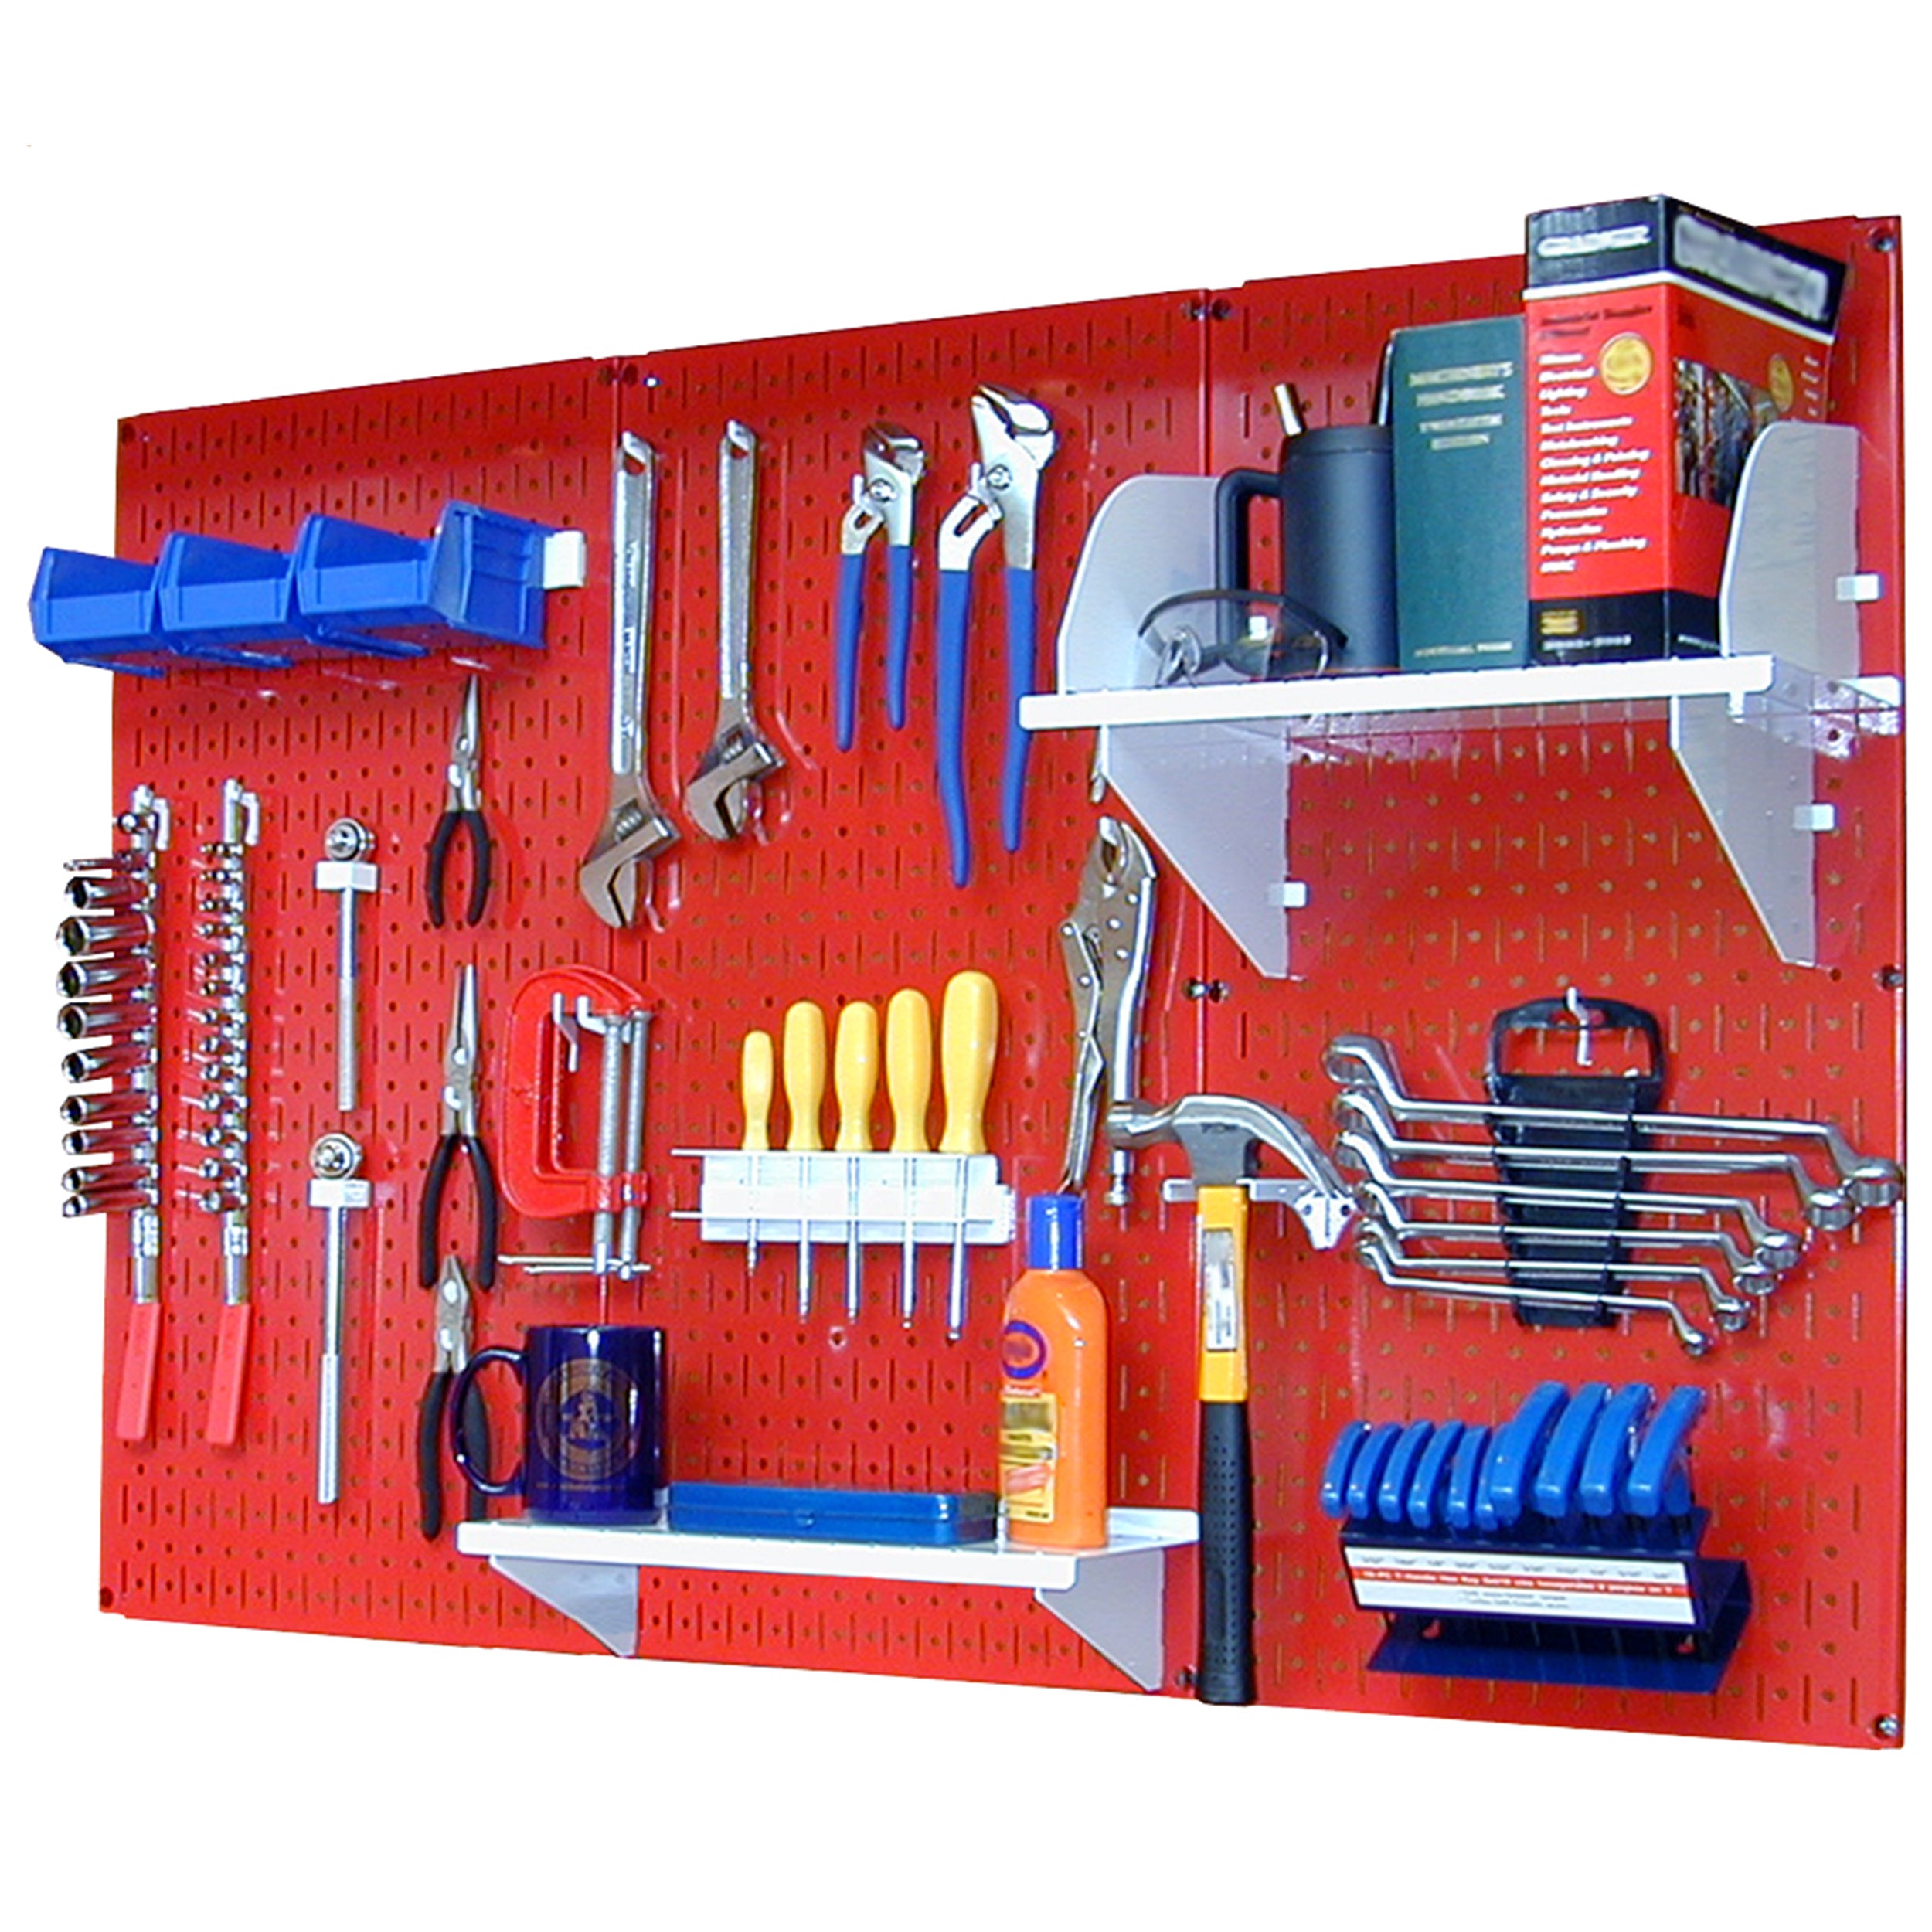 Wall Control Storage Systems 4' Metal Pegboard Standard Tool Storage Kit -  Red Toolboard & White Accessories